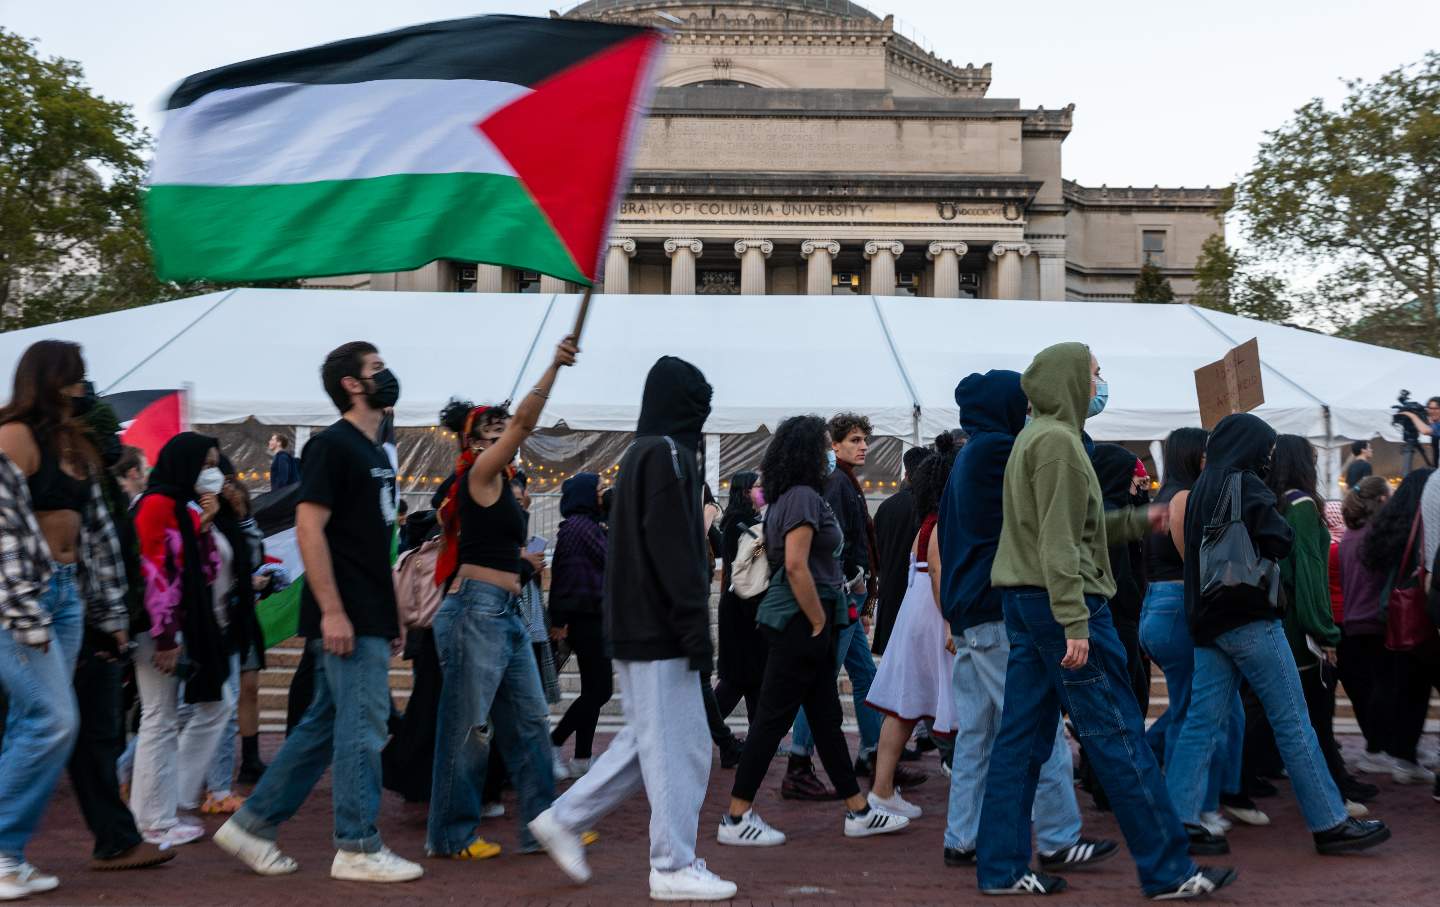 Student Palestinian Group Holds Rally At Columbia University